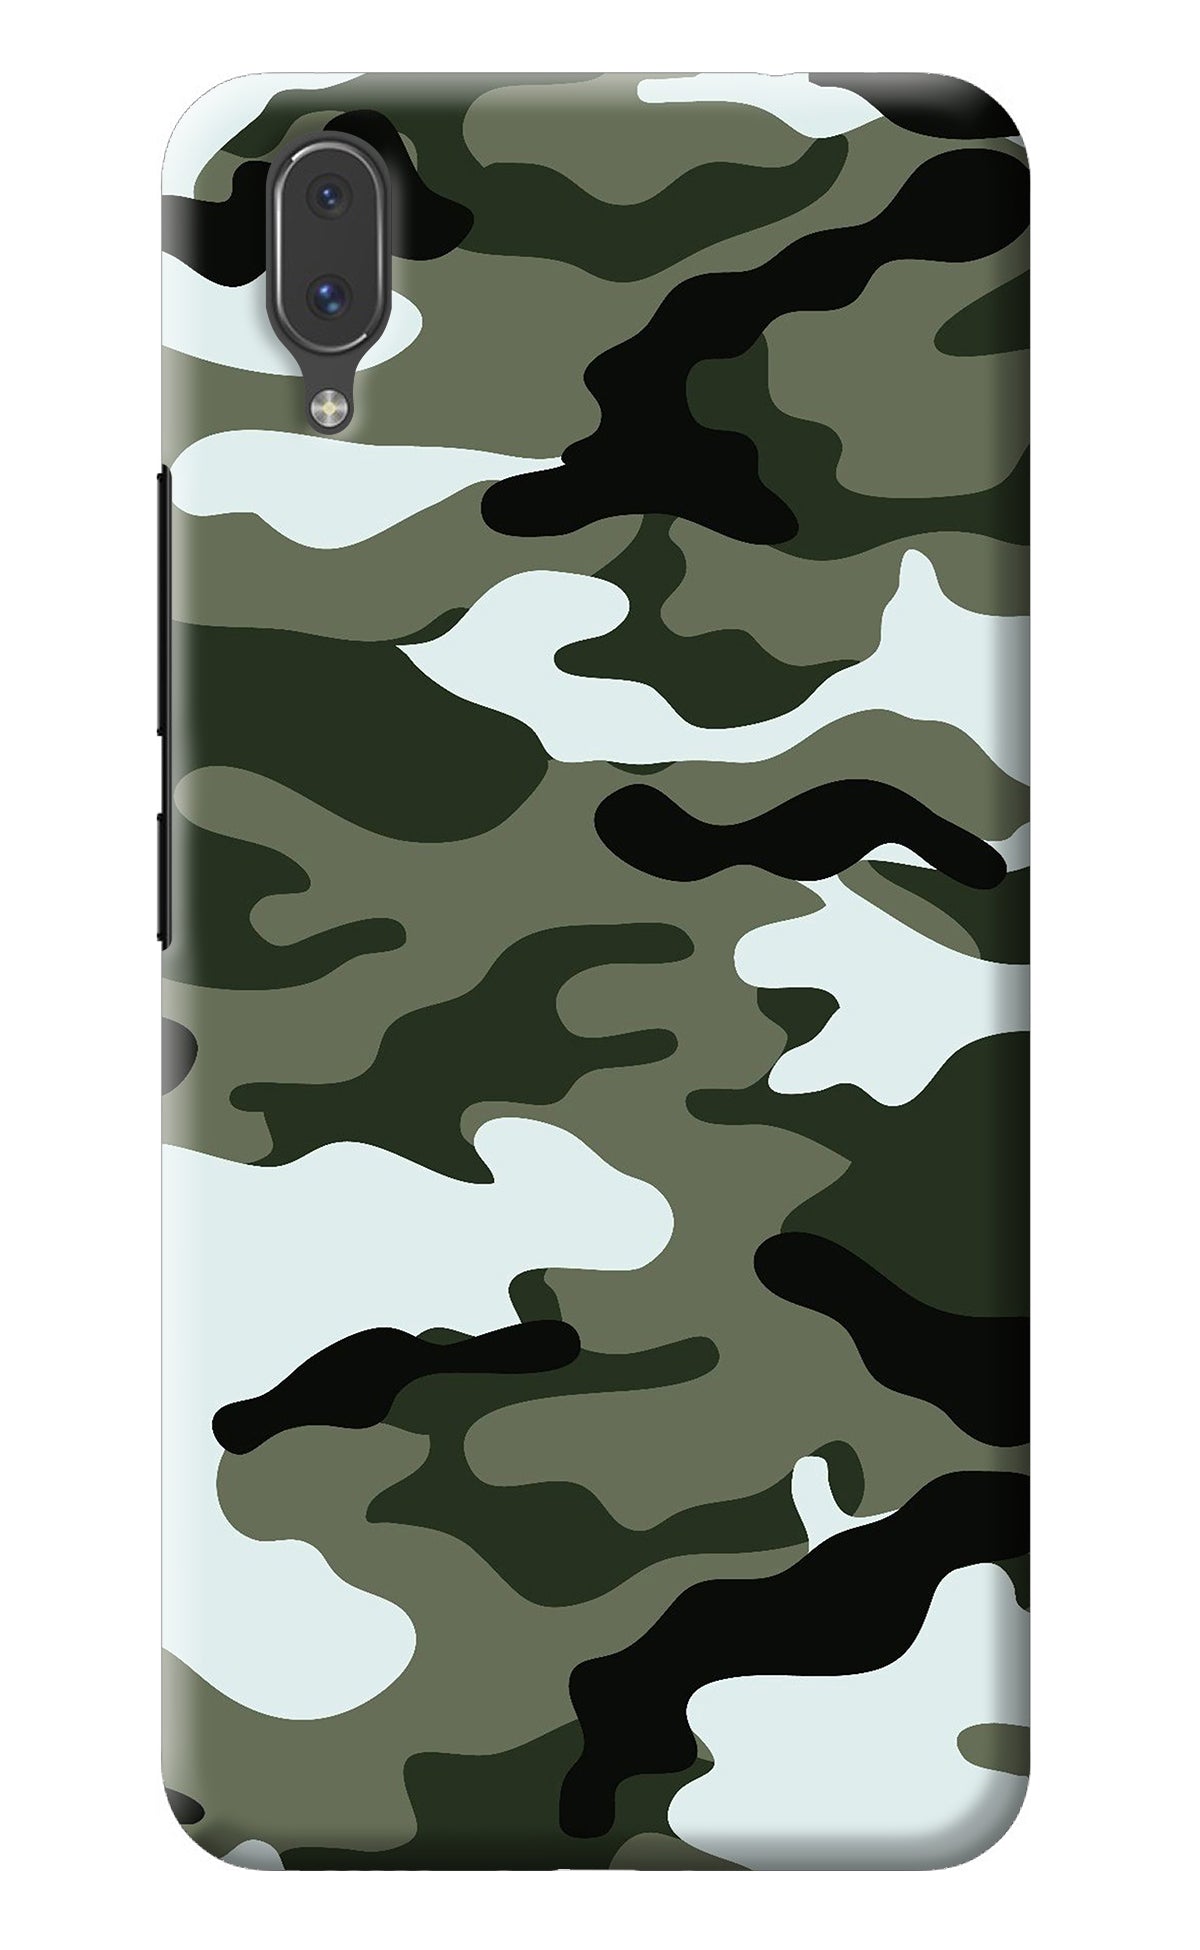 Camouflage Vivo X21 Back Cover